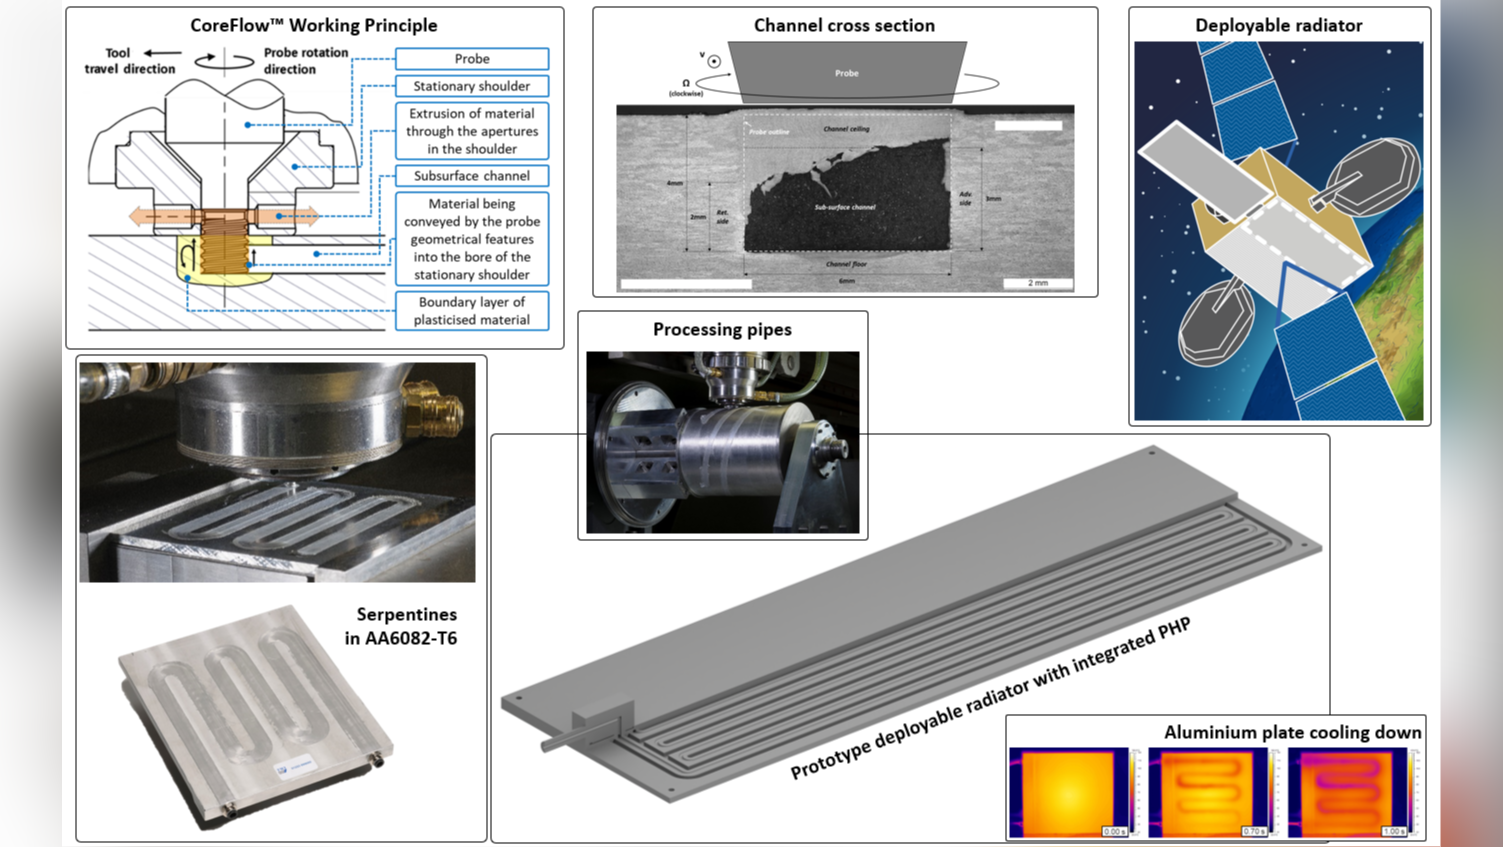 Novel thermal management applications based on pulsating heat pipes